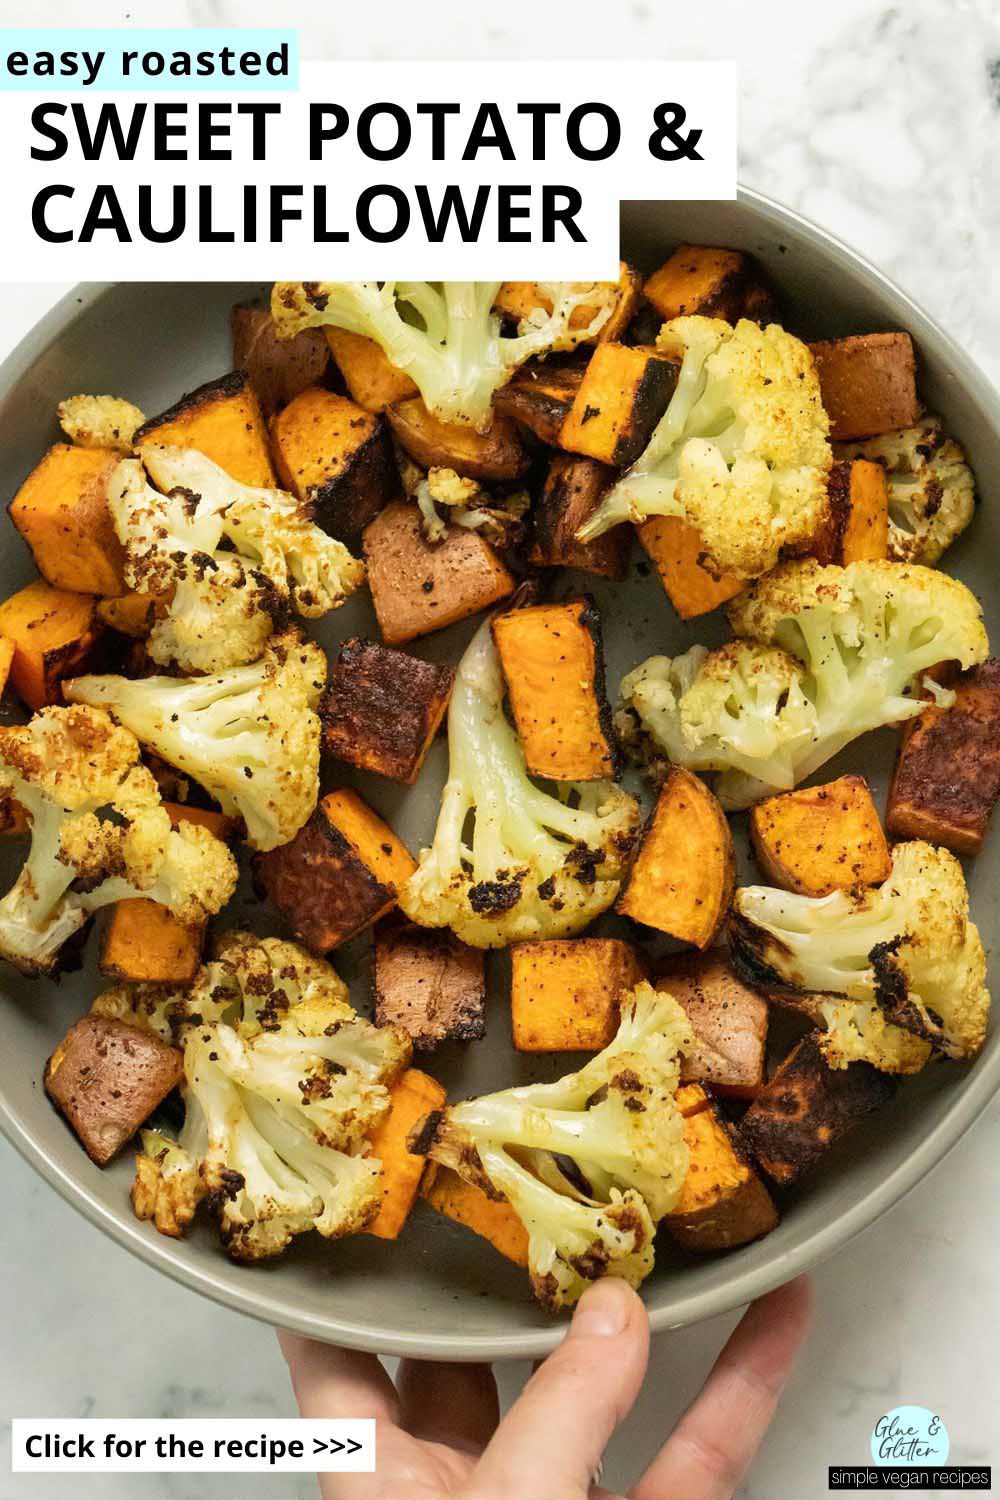 serving dish of roasted cauliflower and sweet potato, text overlay